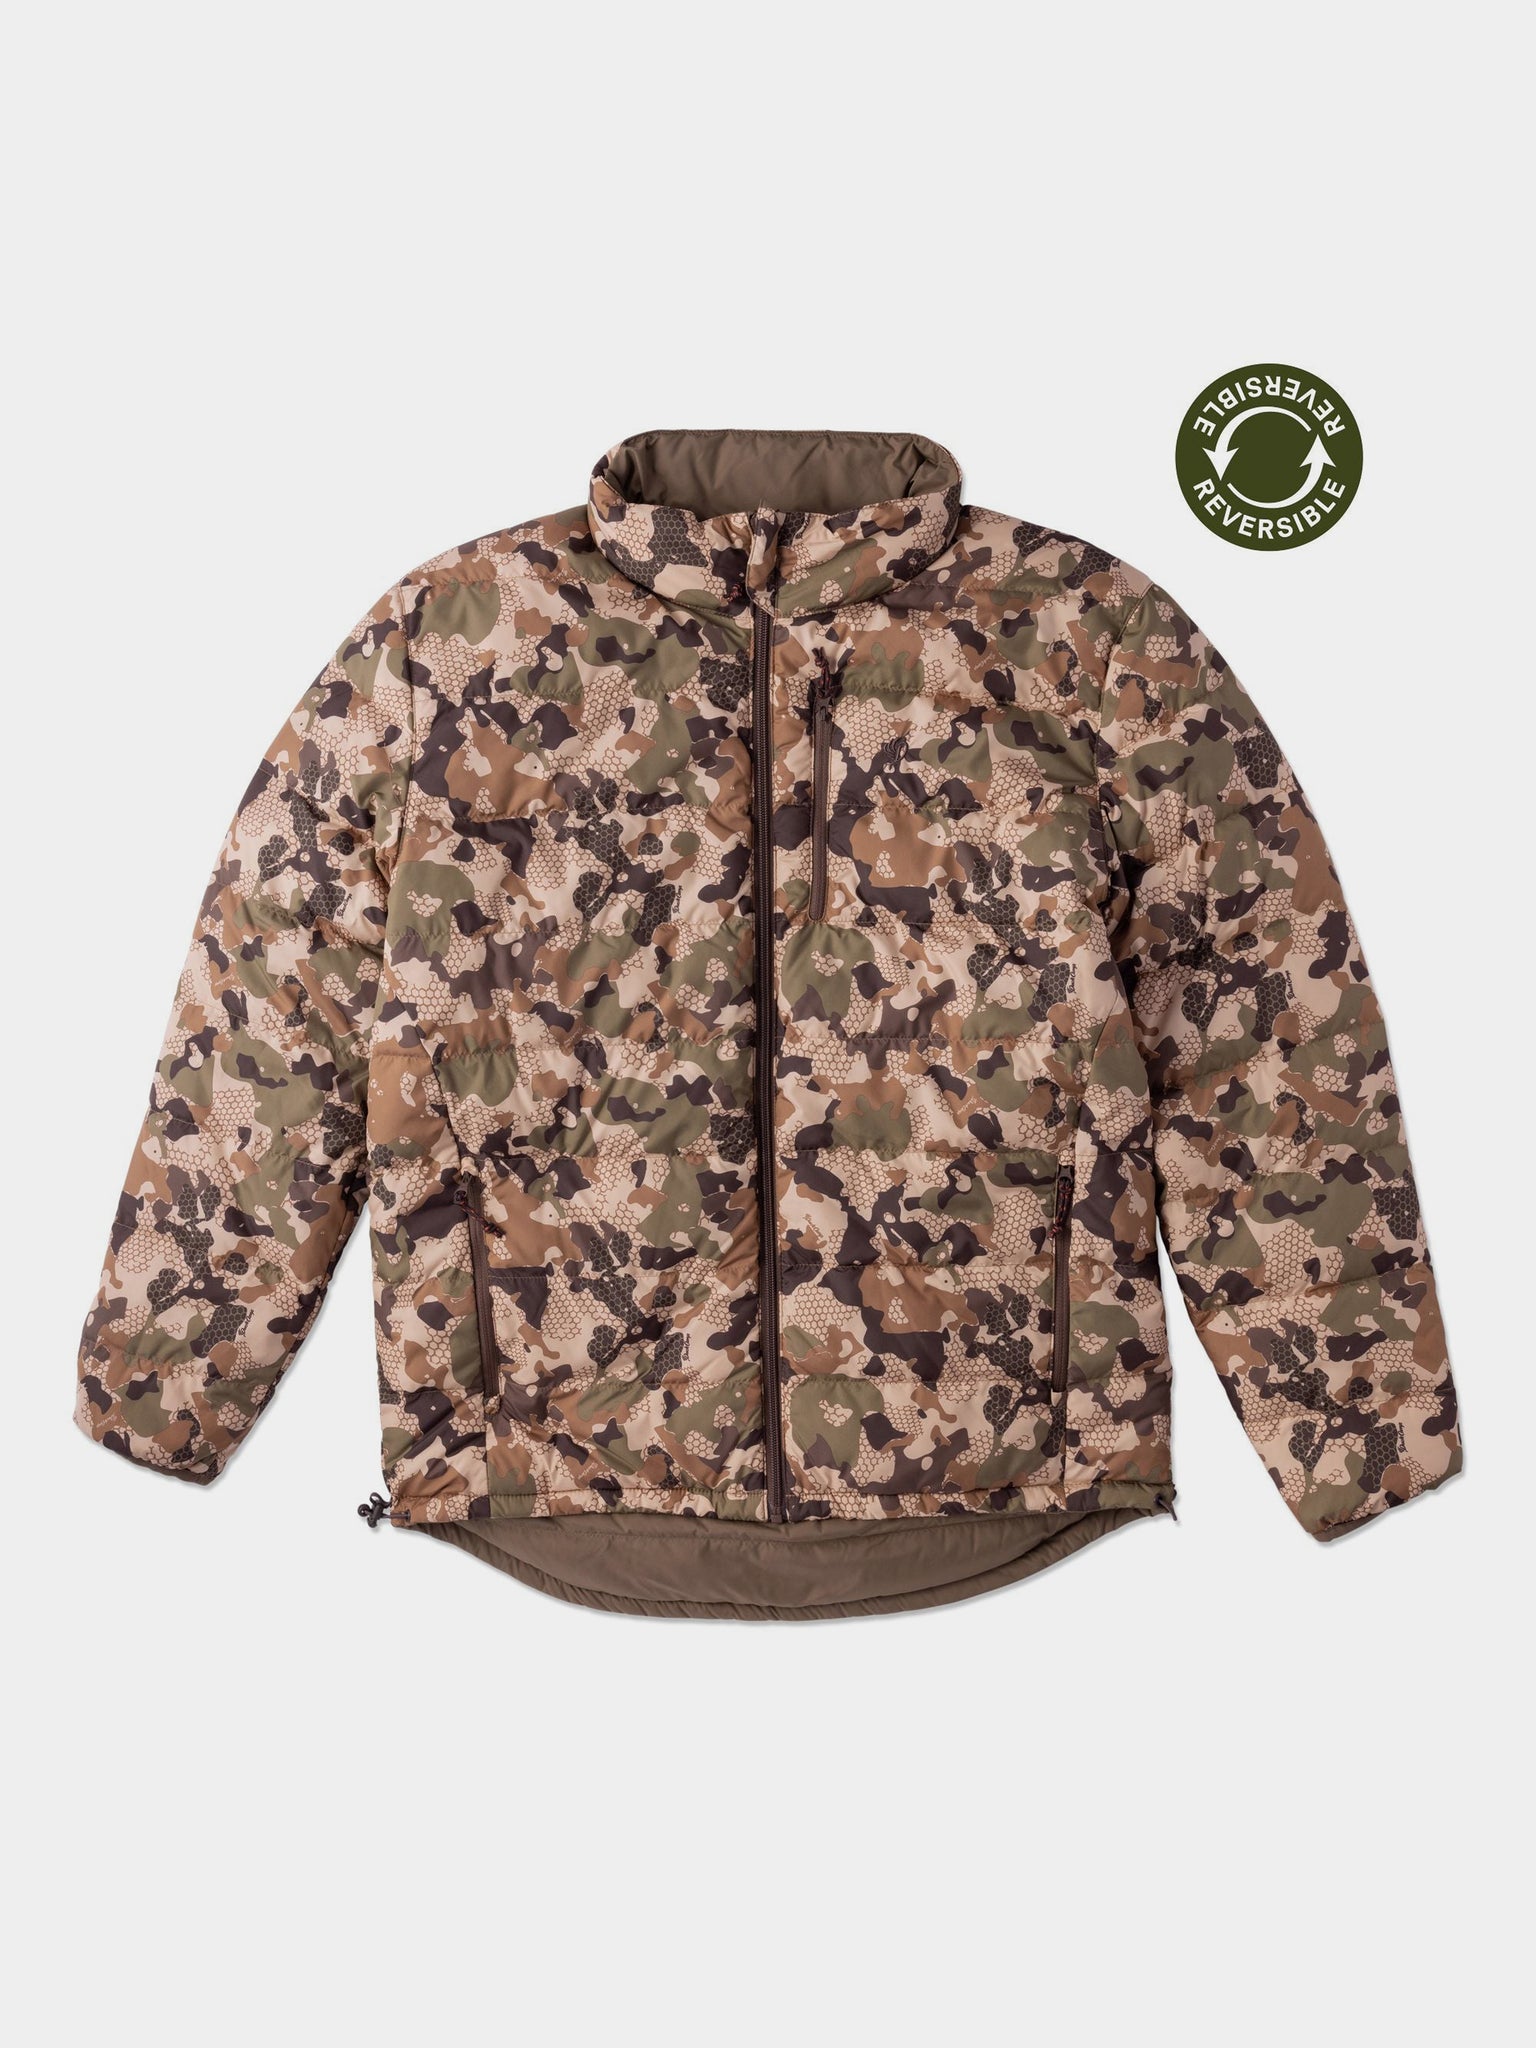 Top quality Rain Camo Reflective Down Jacket Men Women 90% Duck Down Sleeve  Patch Embroidered Puffy Jackets Coats Men